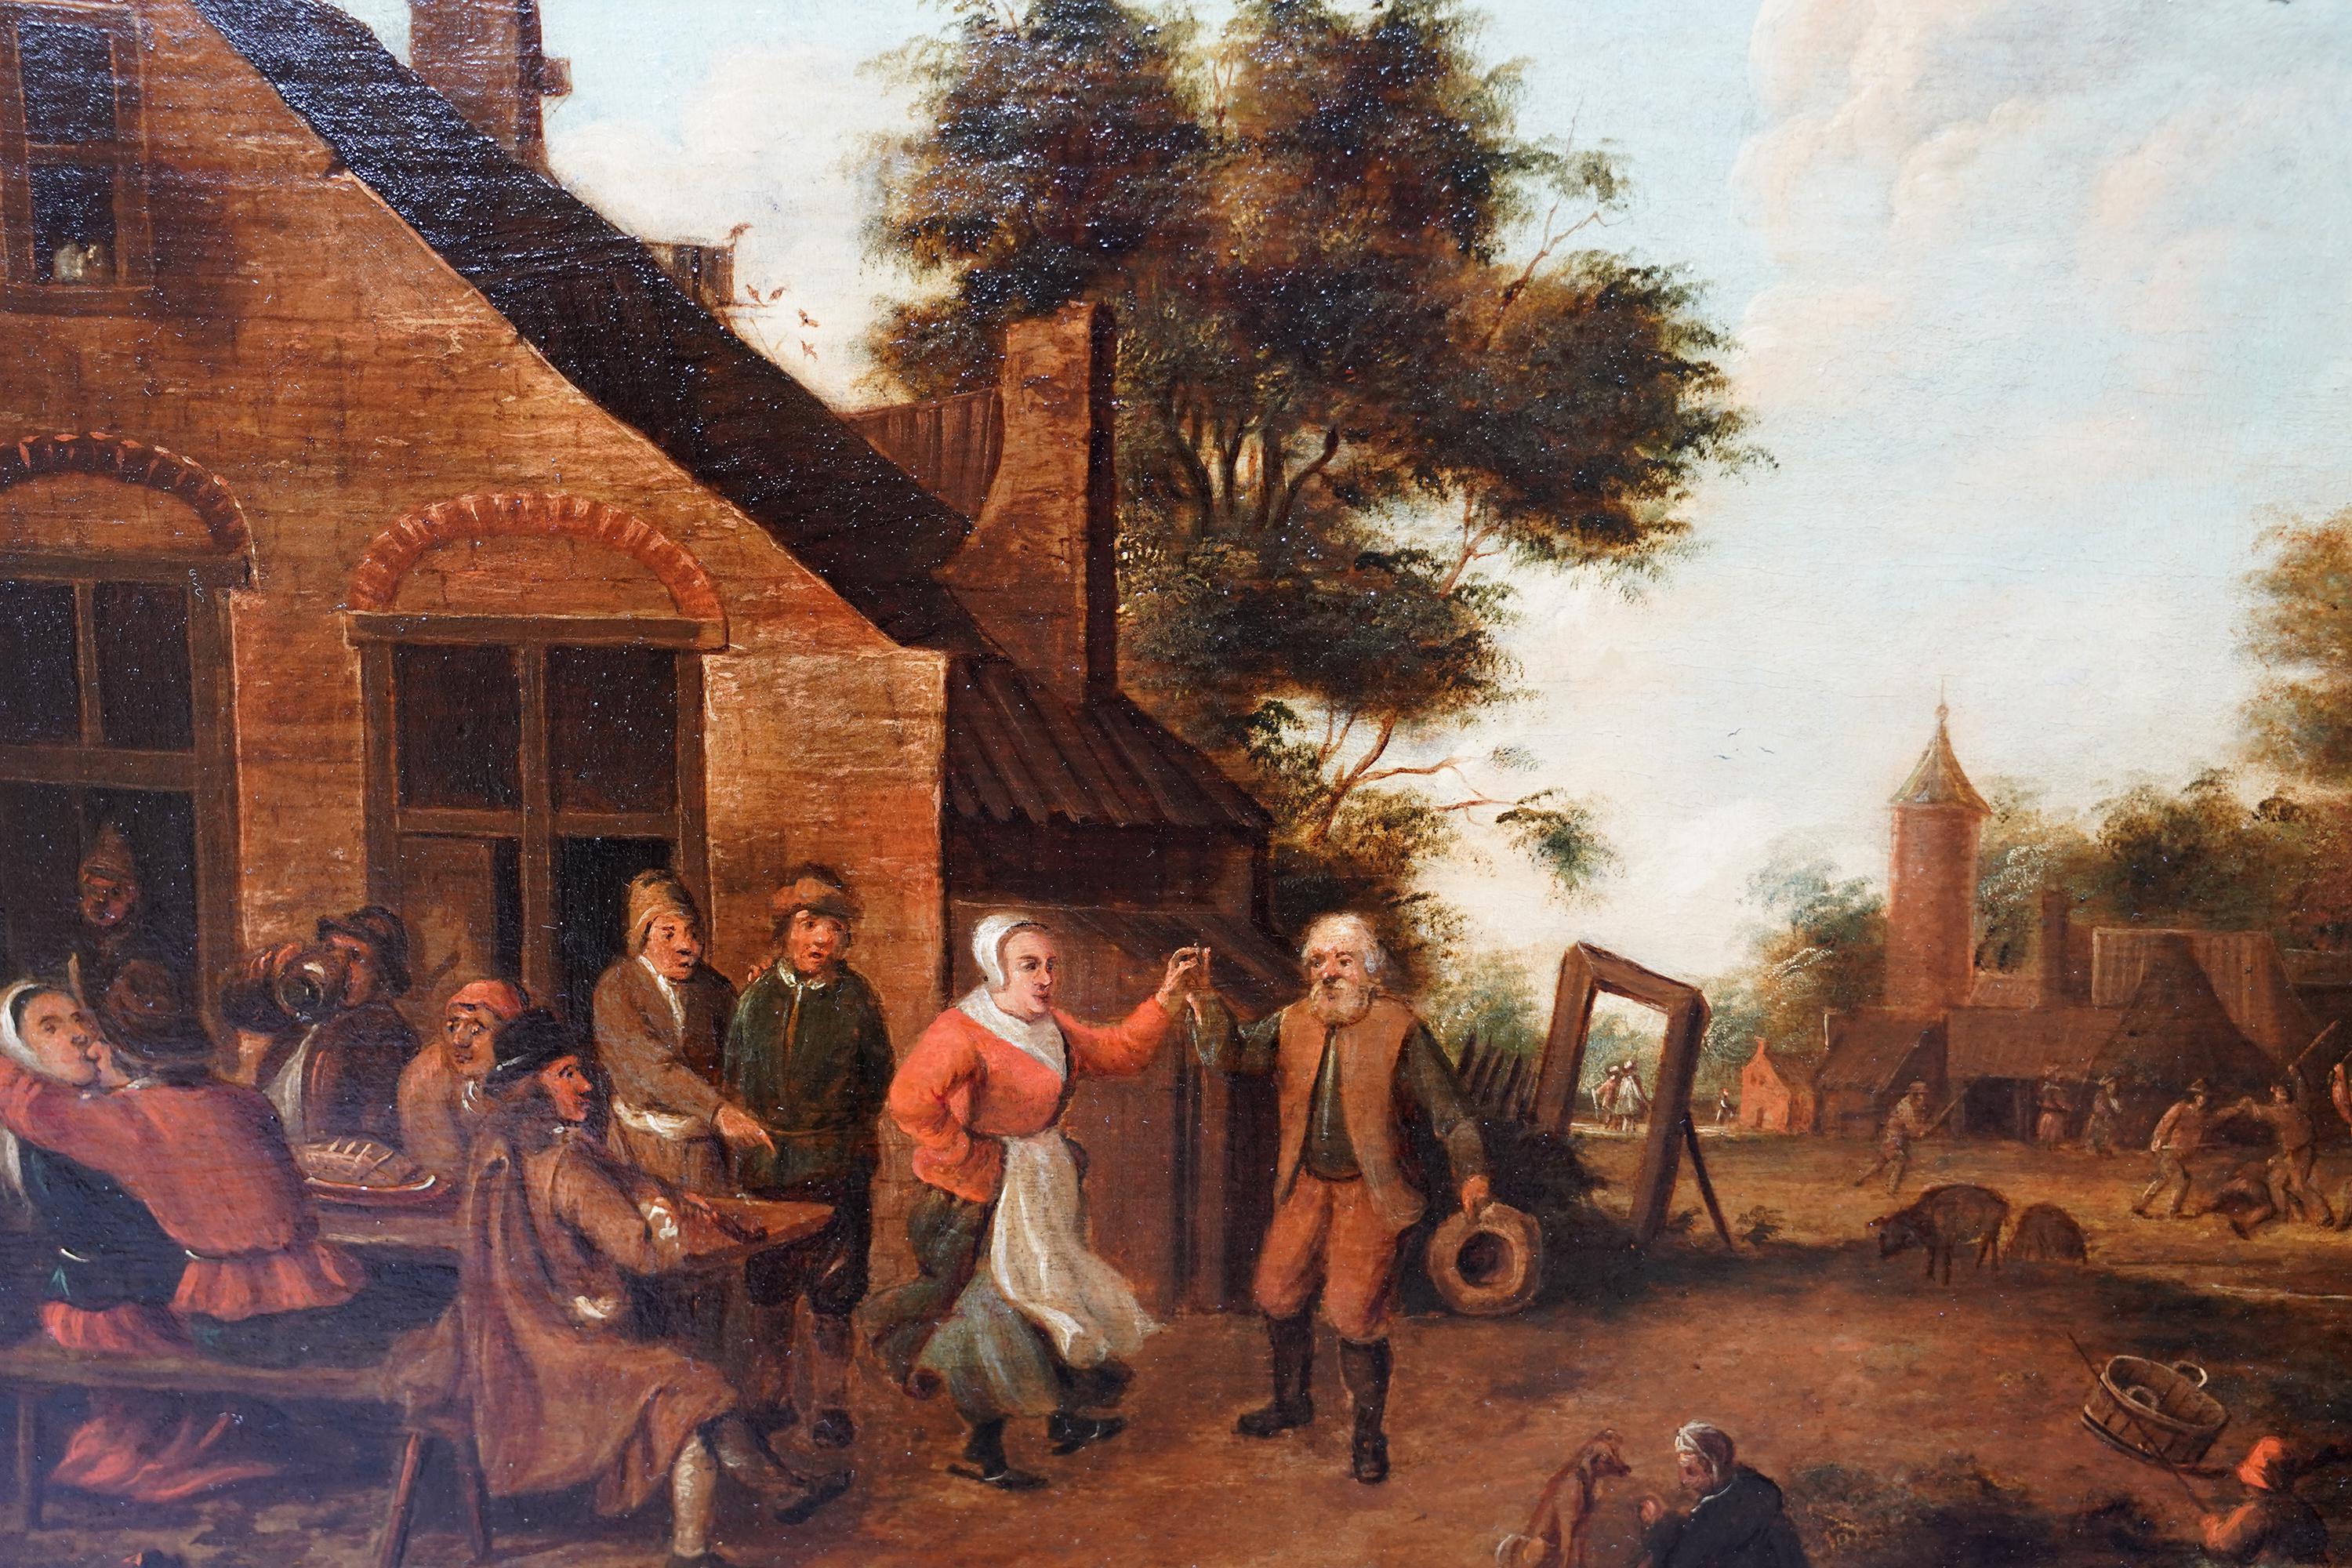 Villagers in a Landscape - Flemish 17thC art figurative landscape oil painting - Old Masters Painting by Thomas van Apshoven